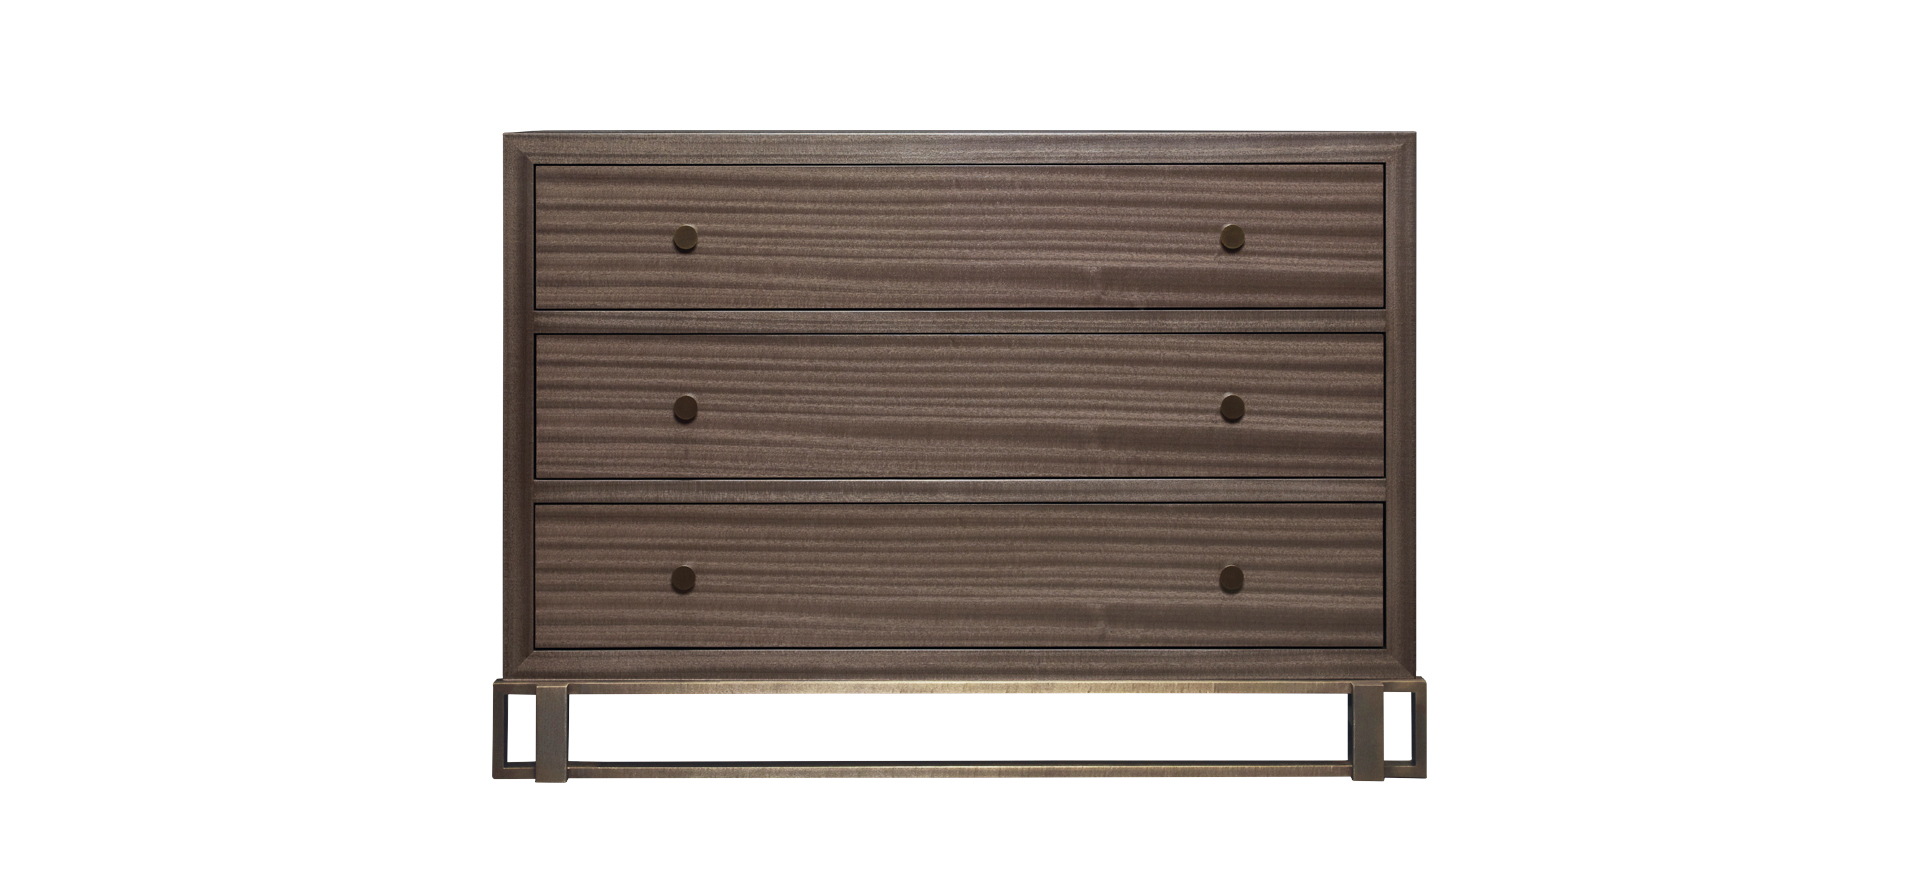 Margot is a wooden chest of drawers with metal details and bronze base and knobs from Promemoria's catalogue | Promemoria